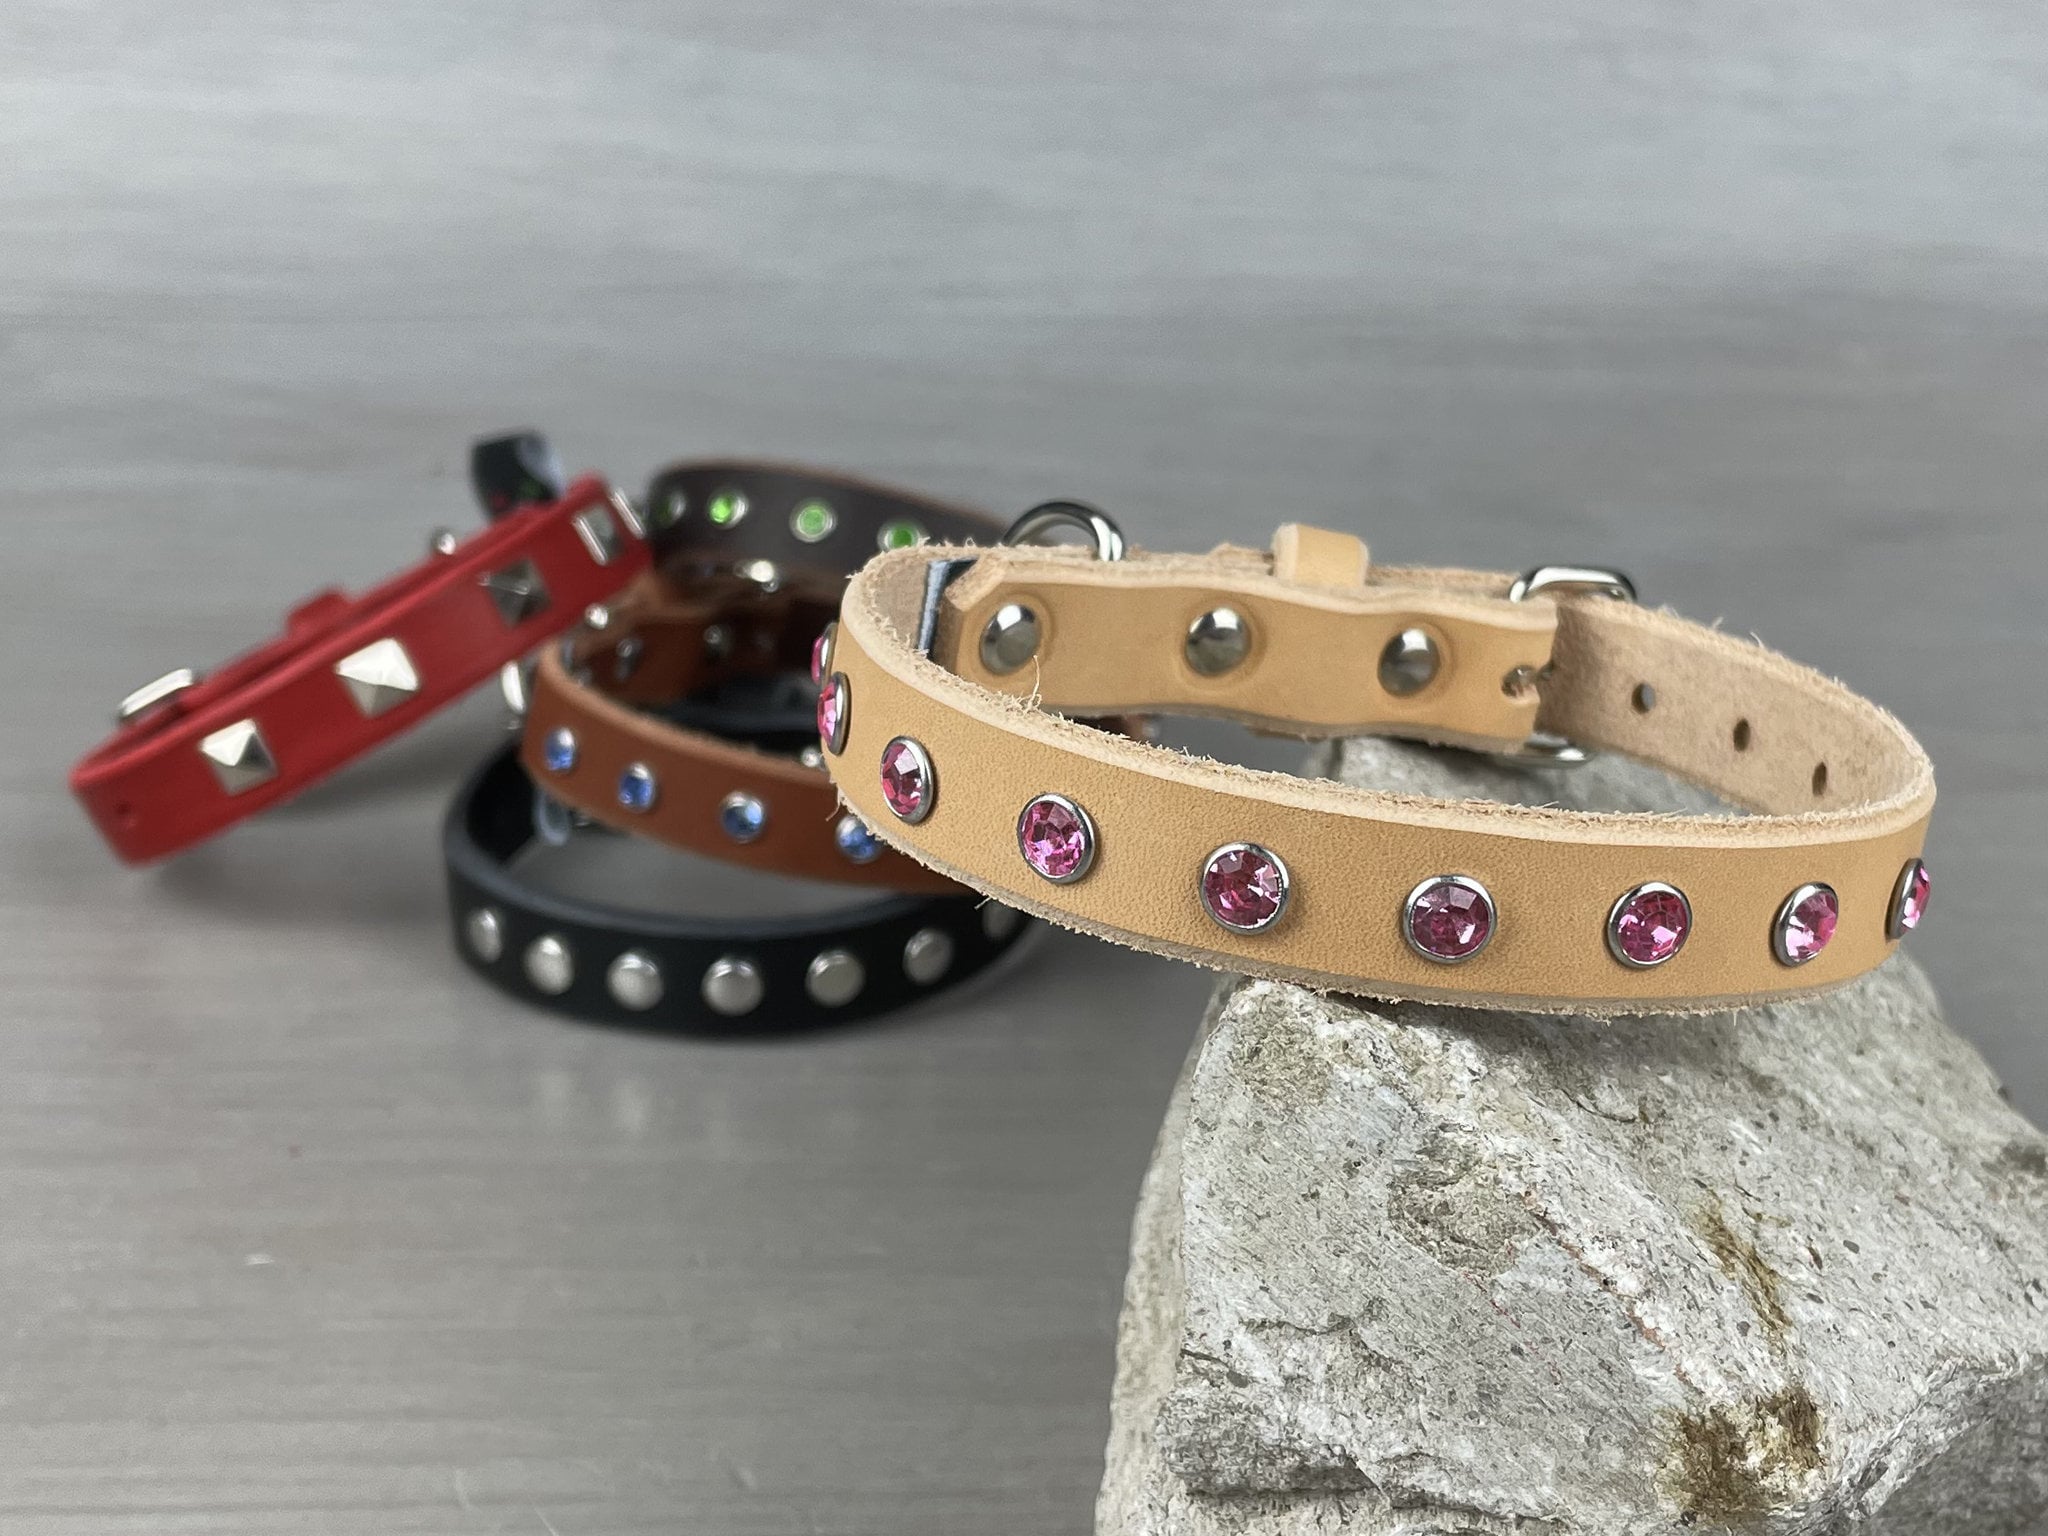 5/8 Wide Collar for Small and Toy Dog Breeds Red Leather Dog Collar Decorated with Rhinestones or Studs Luxury Leather Dog Collar